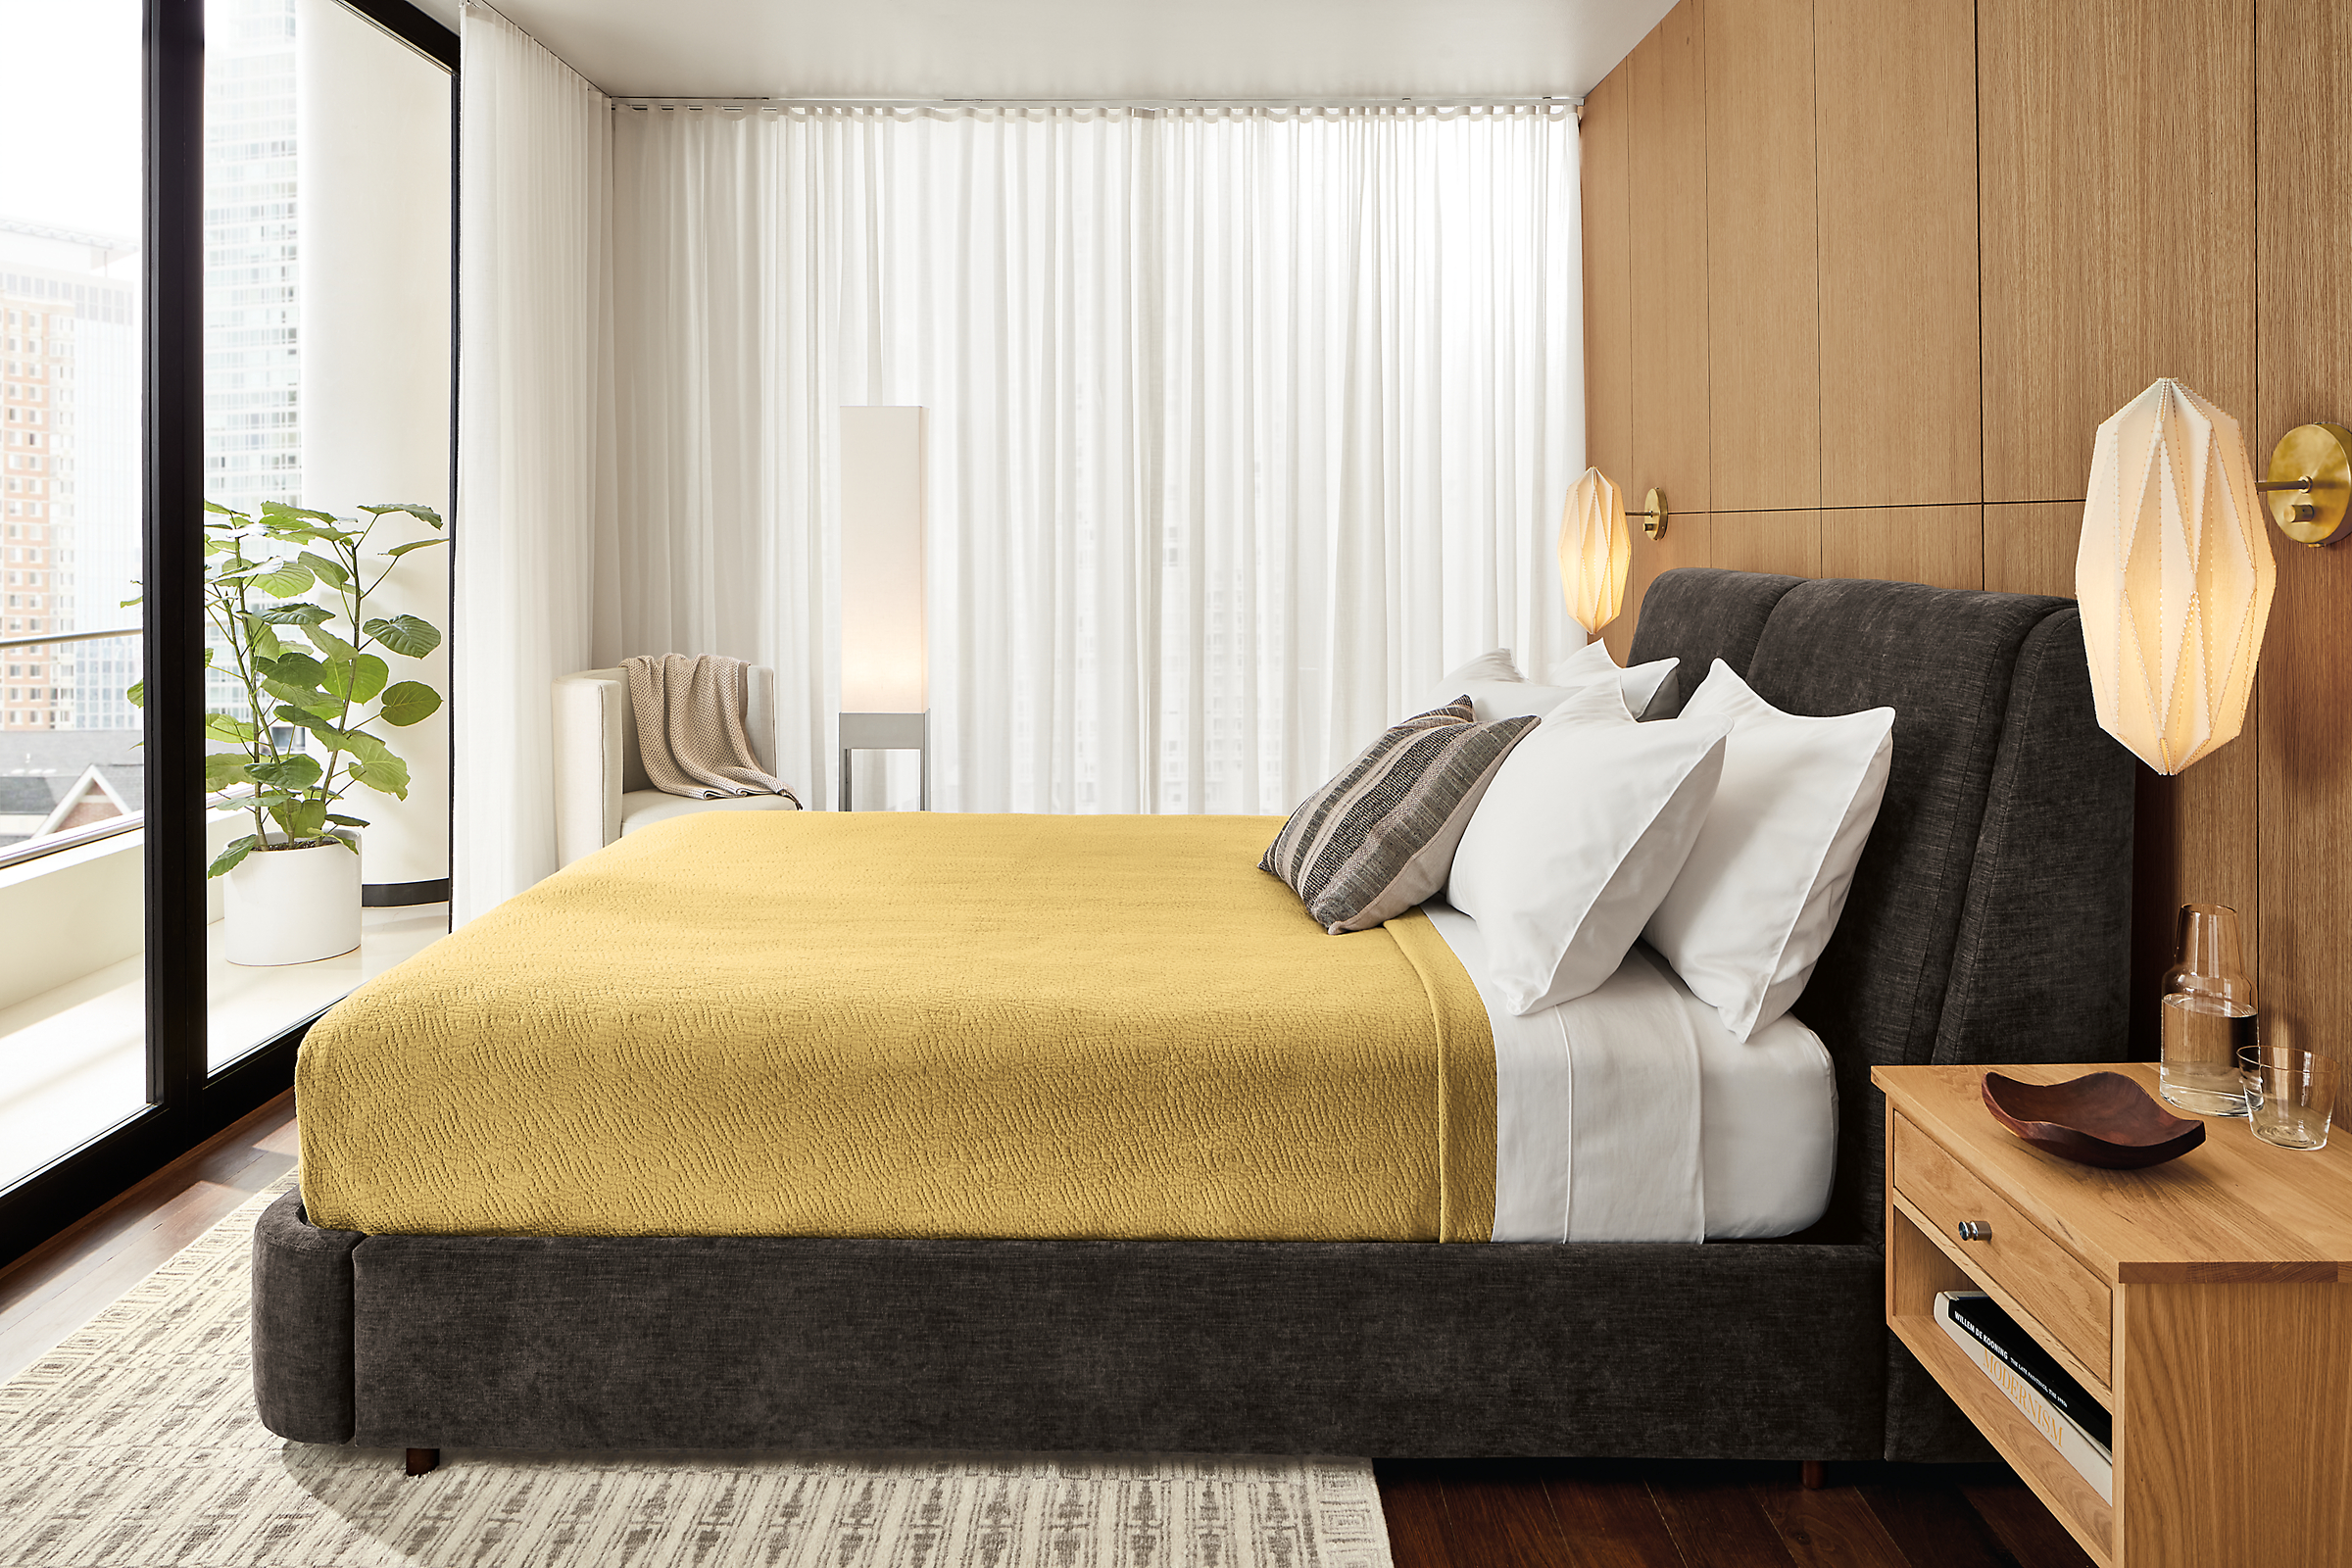 Bedroom with Nora storage bed in mori charcoal fabric with yellow blanket.